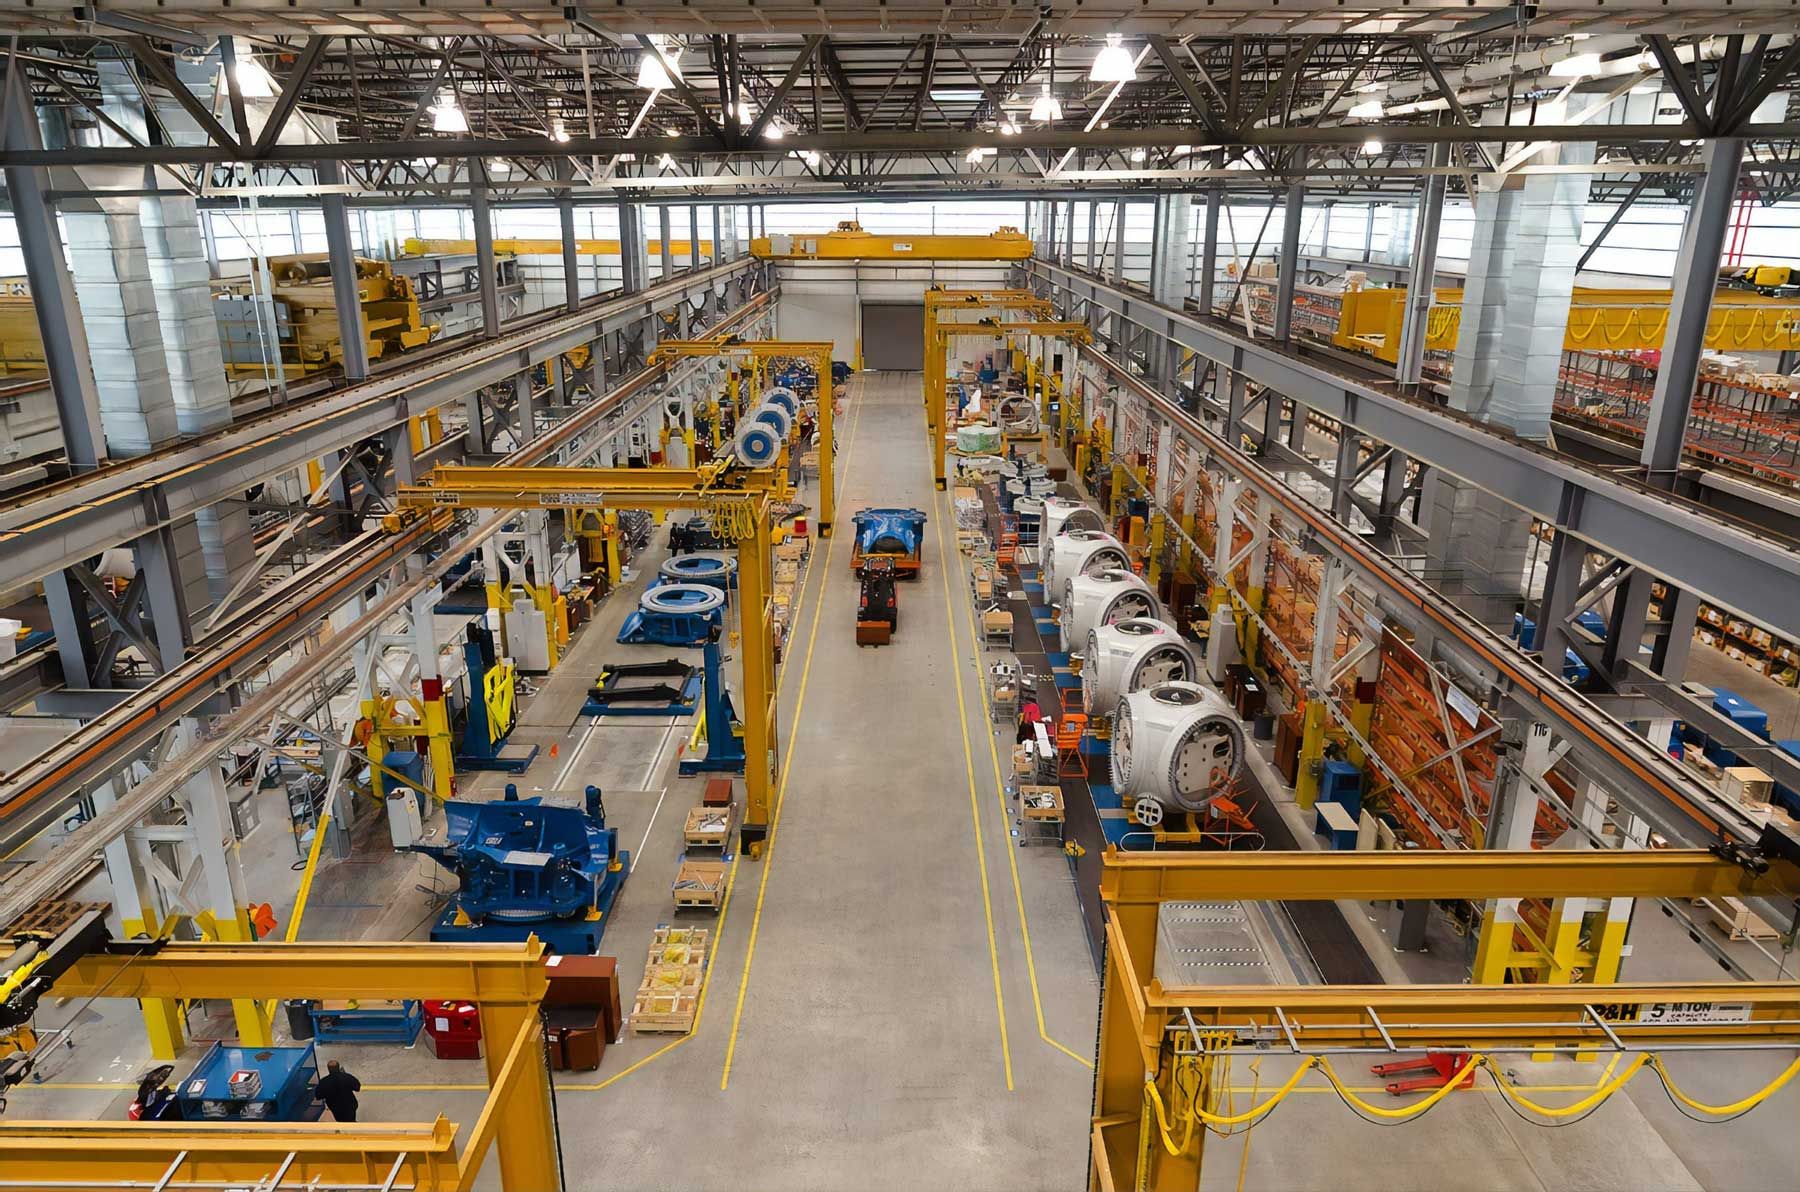 Manufacturing plant making wind turbines on assembly line